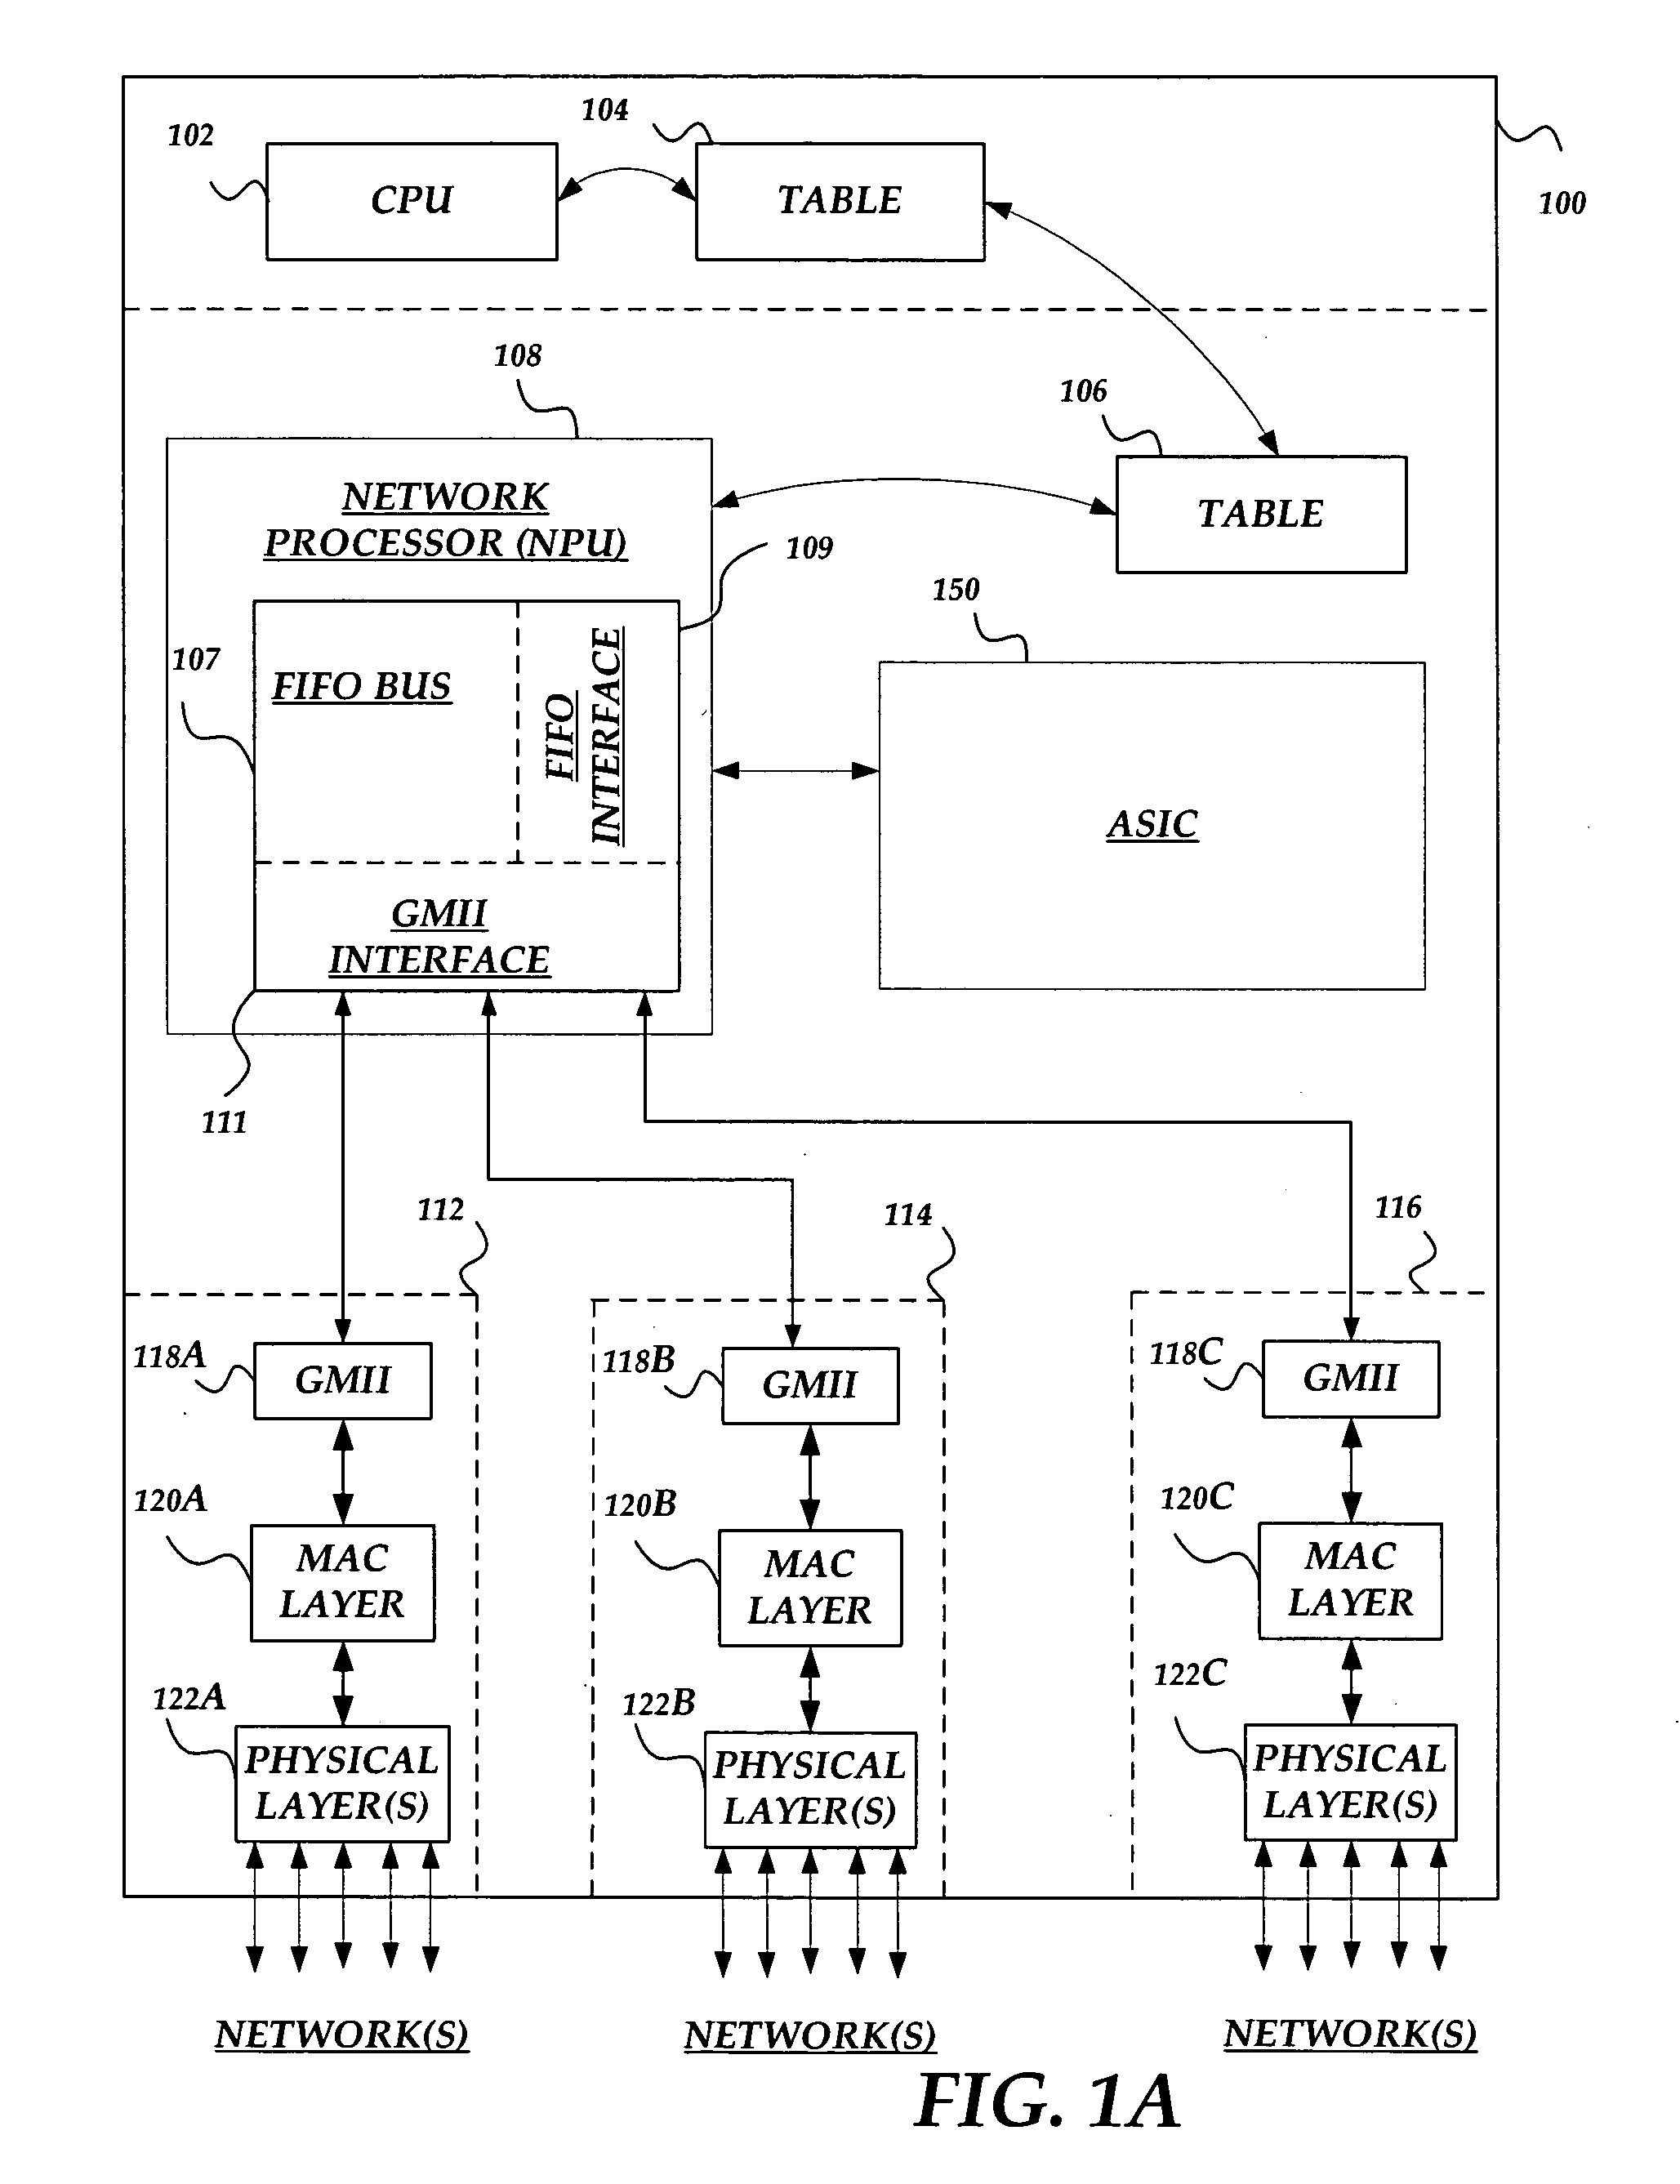 Primary control marker data structure